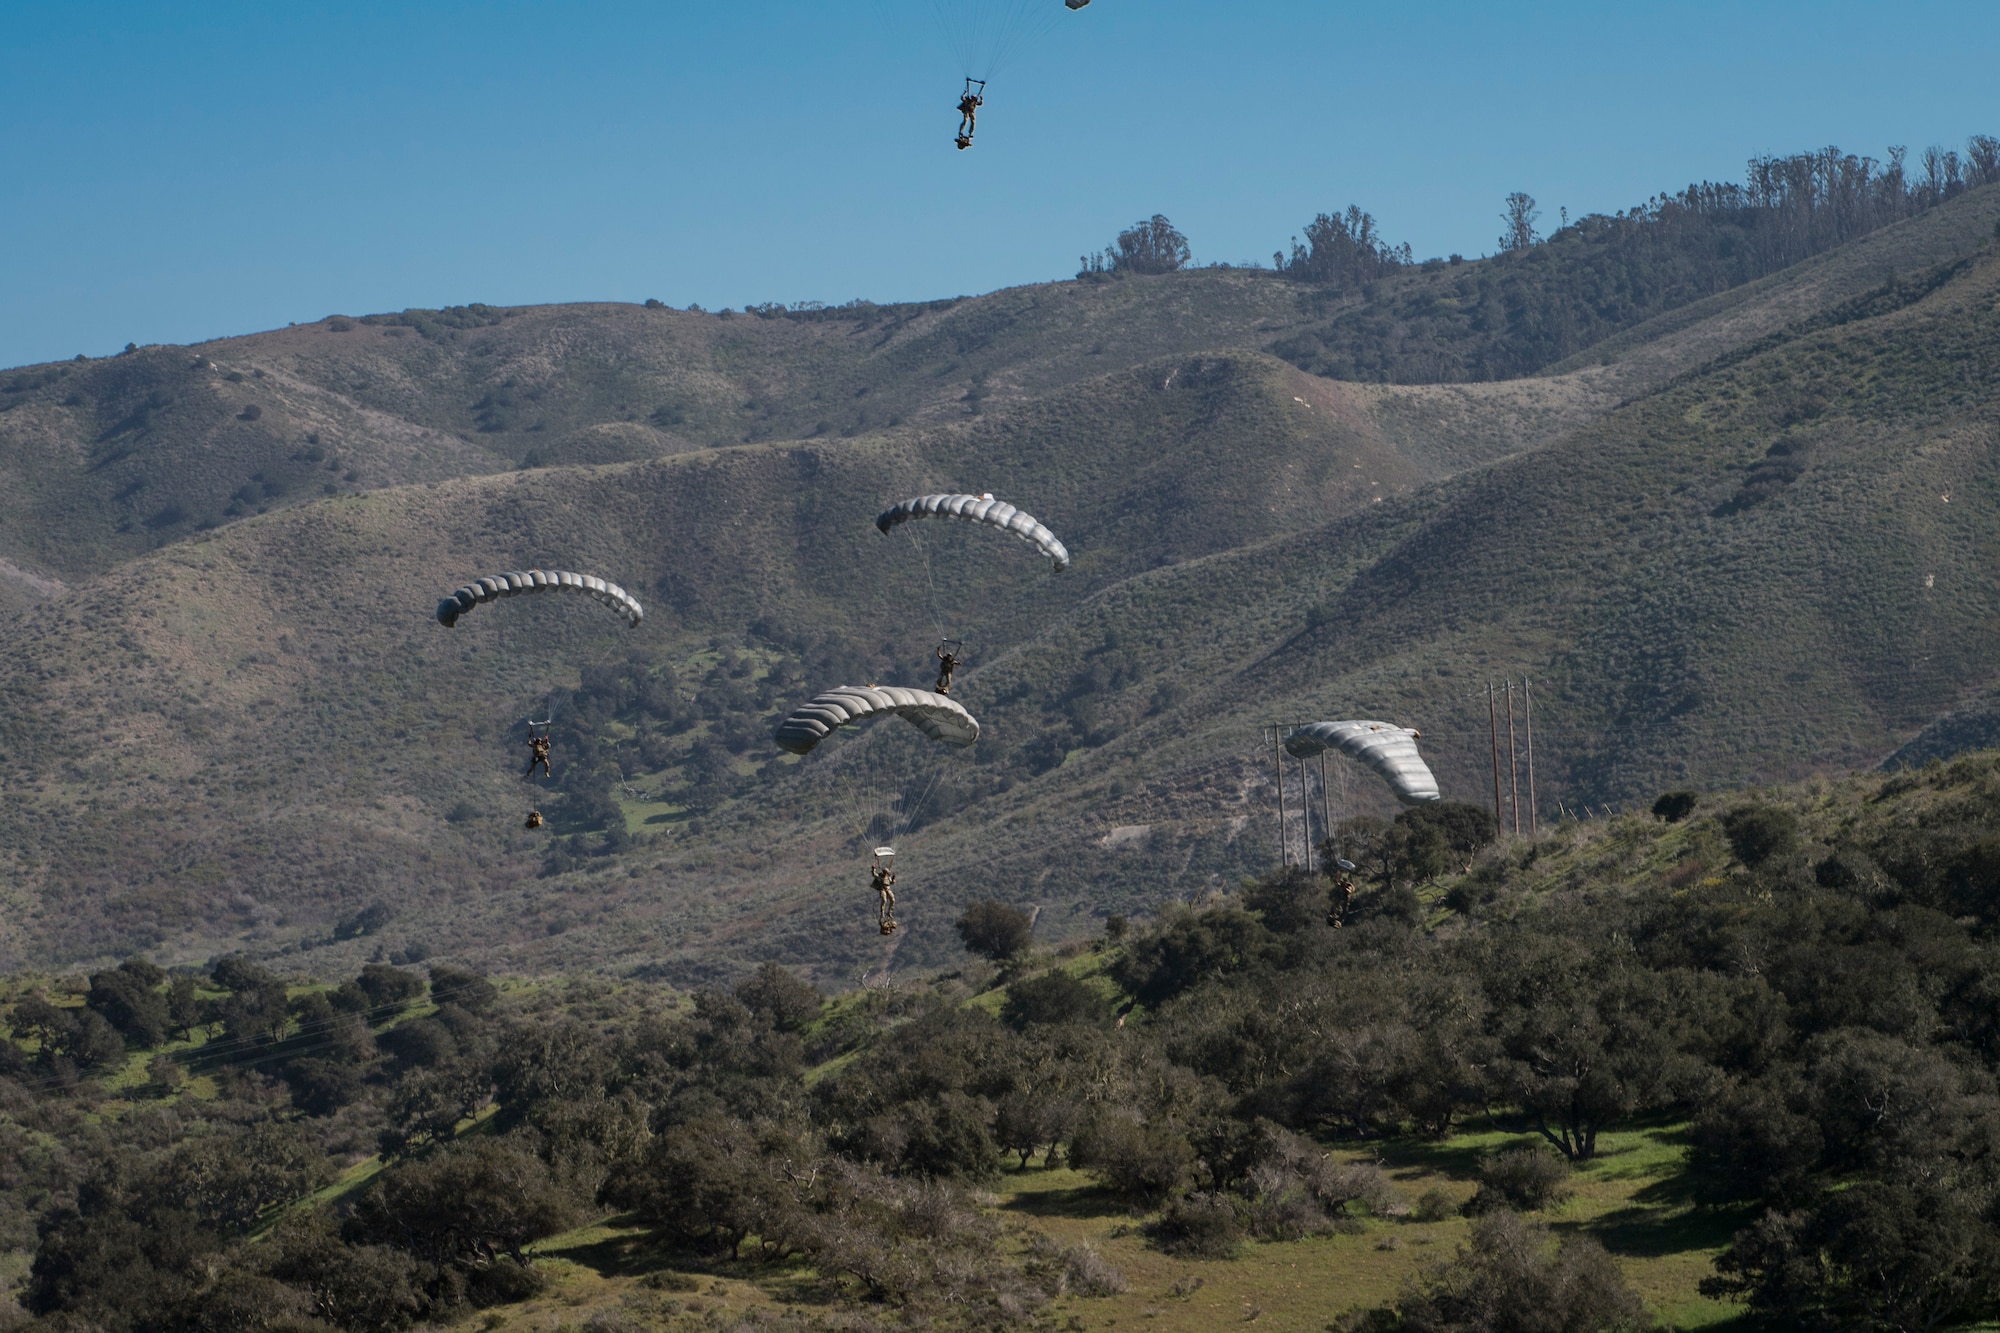 Pararescuemen from the 58th Rescue Squadron Nellis Air Force Base, Nev.,  descend onto a drop zone during Tiger Rescue IV, March 28, 2018, at Vandenberg Air Force Base, Calif. The four-day exercise challenged Airmen from multiple rescue squadrons to bring the capabilities of the personnel recovery triad together to successfully complete rescue missions and maintain proficiency. The three branches of the personnel recovery triad are the HC-130J Combat King II, HH-60G Pave Hawk and the guardian angel weapons system or pararescuemen. (U.S. Air Force photo by Senior Airman Janiqua P. Robinson)